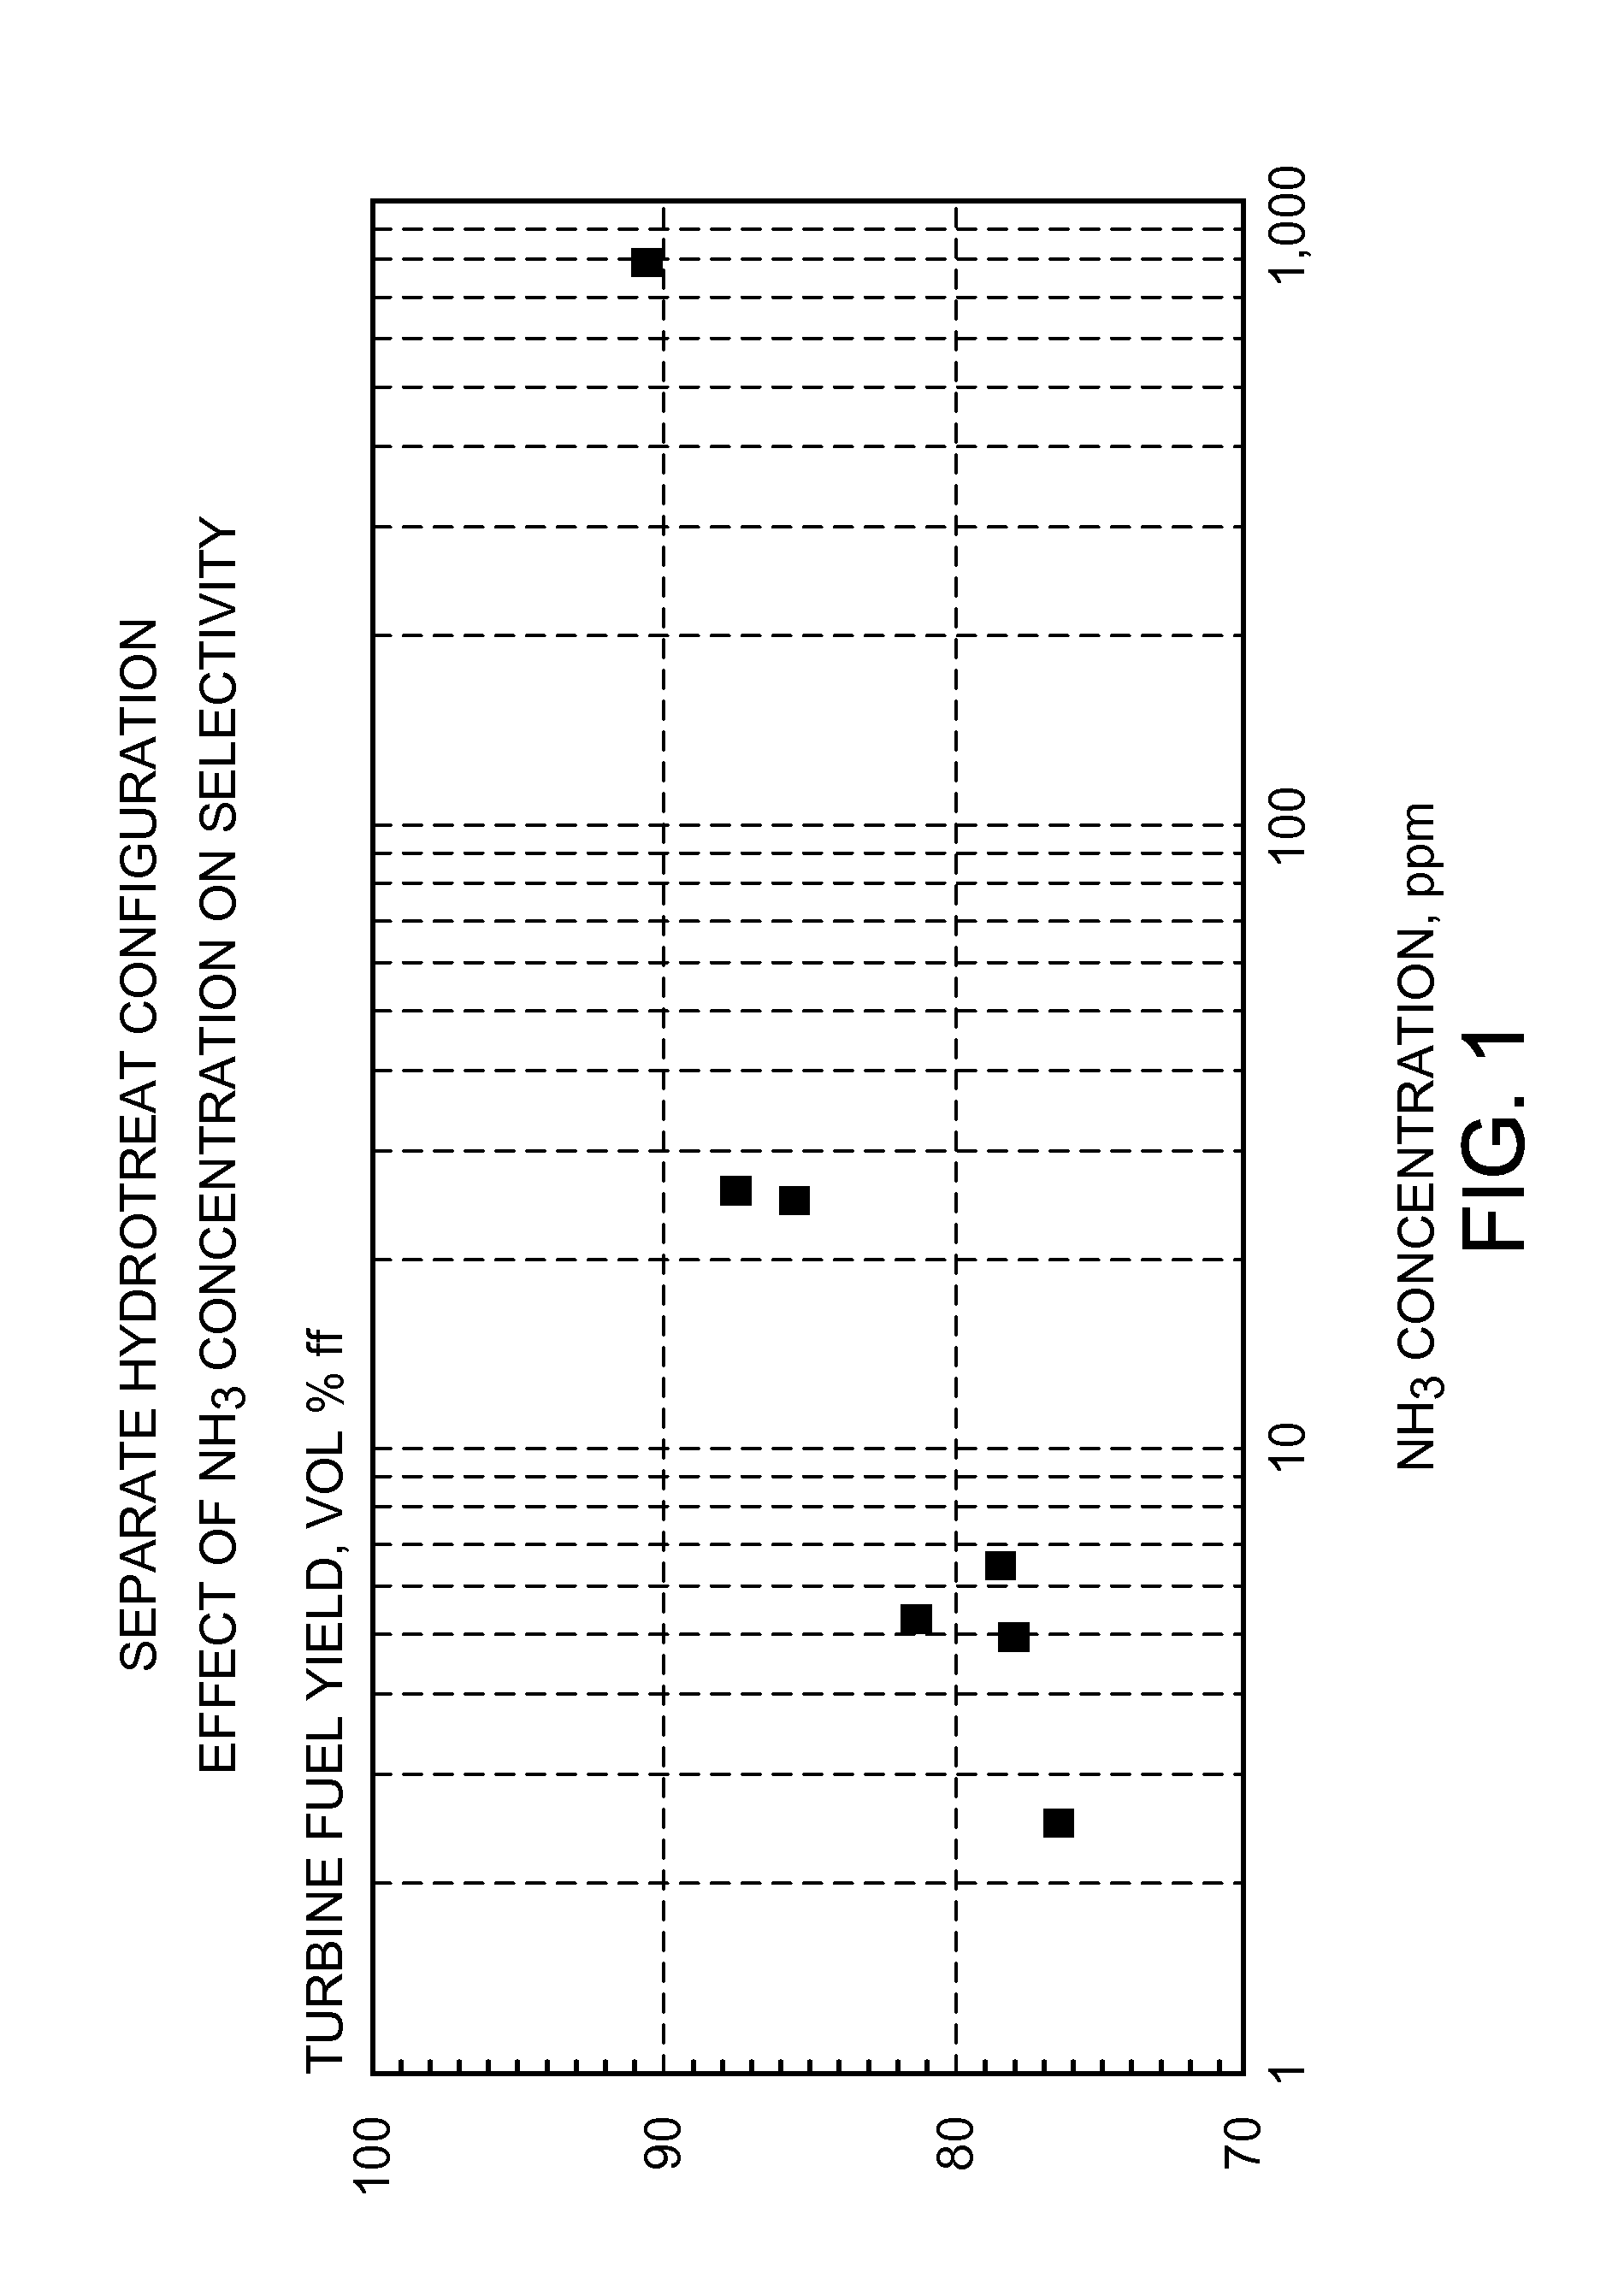 Selective hydrocracking process for either naphtha or distillate production